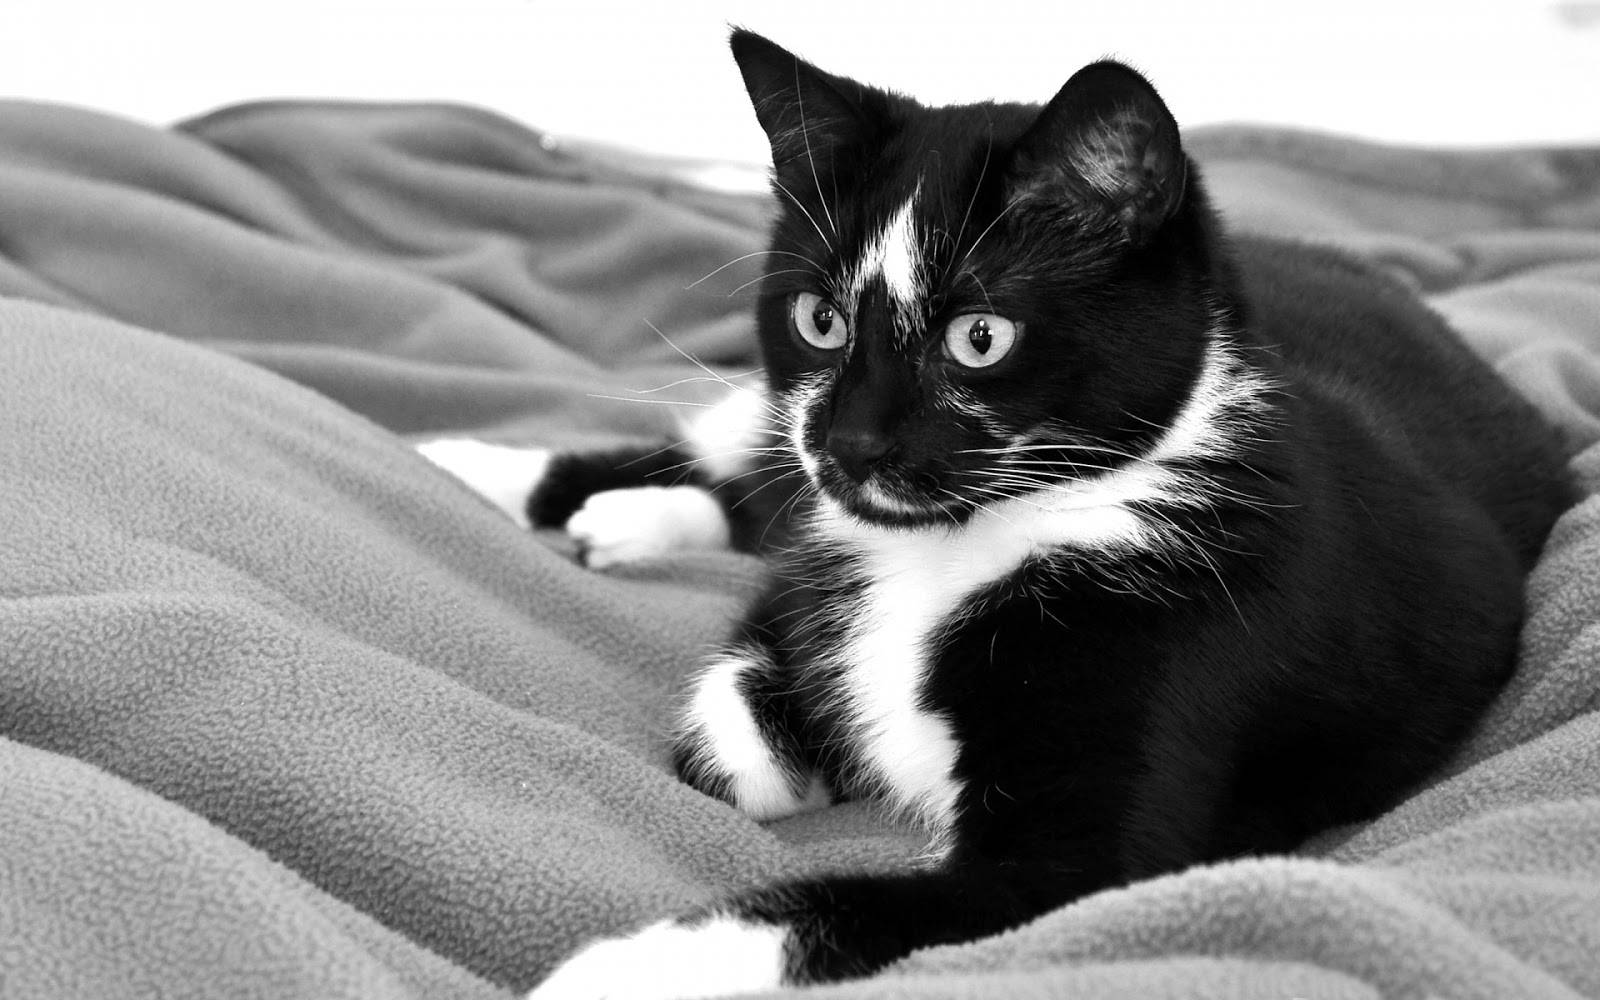 Black And White Cat On A Soft Blanket Background